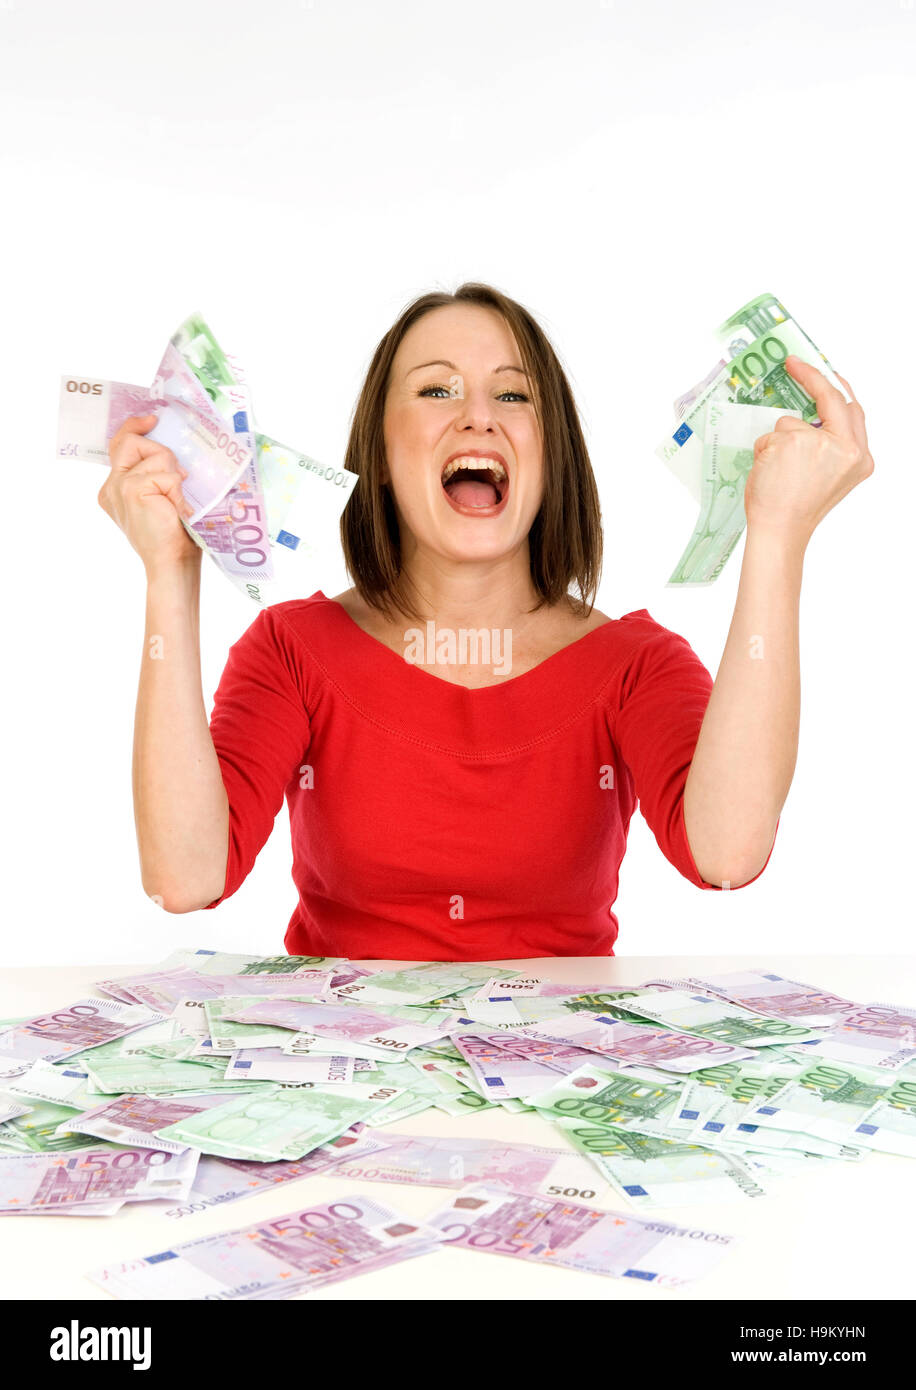 Young woman with a lot of money Stock Photo